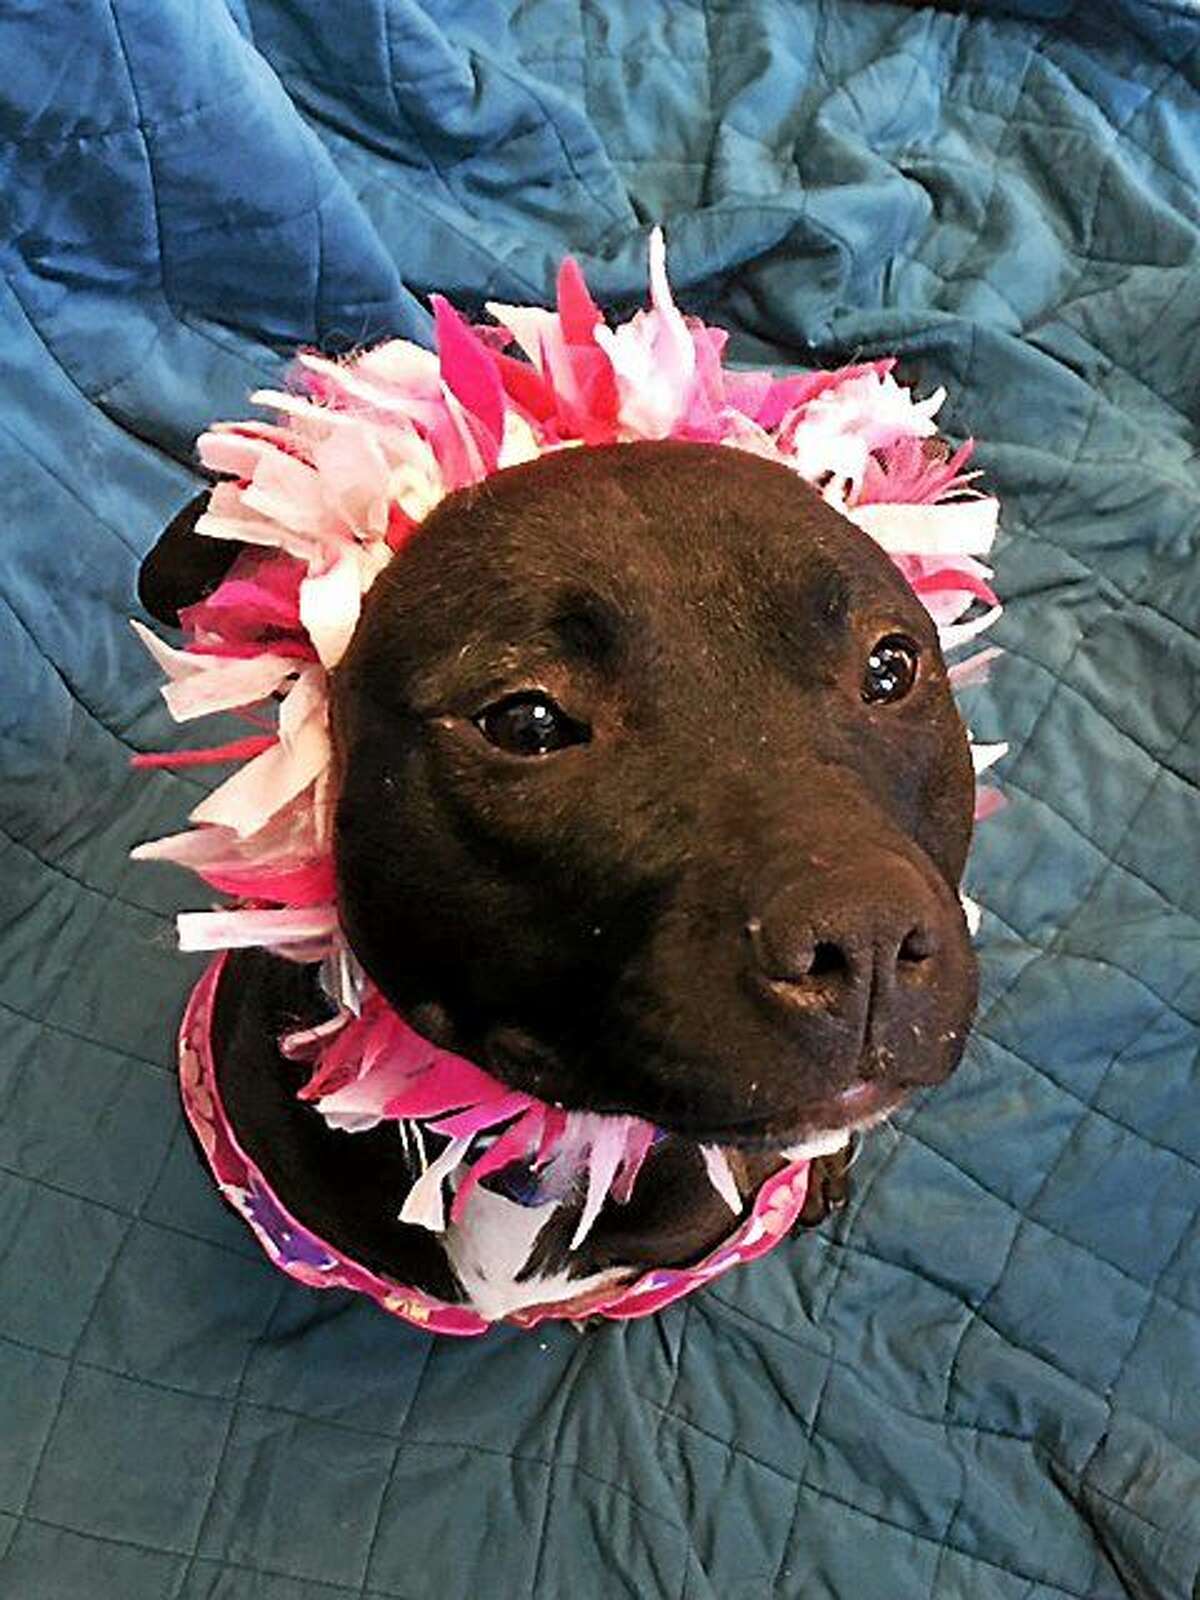 February's Pet of the Month is Chrissy, a female terrier mix and labrador retriever. Contributed photo